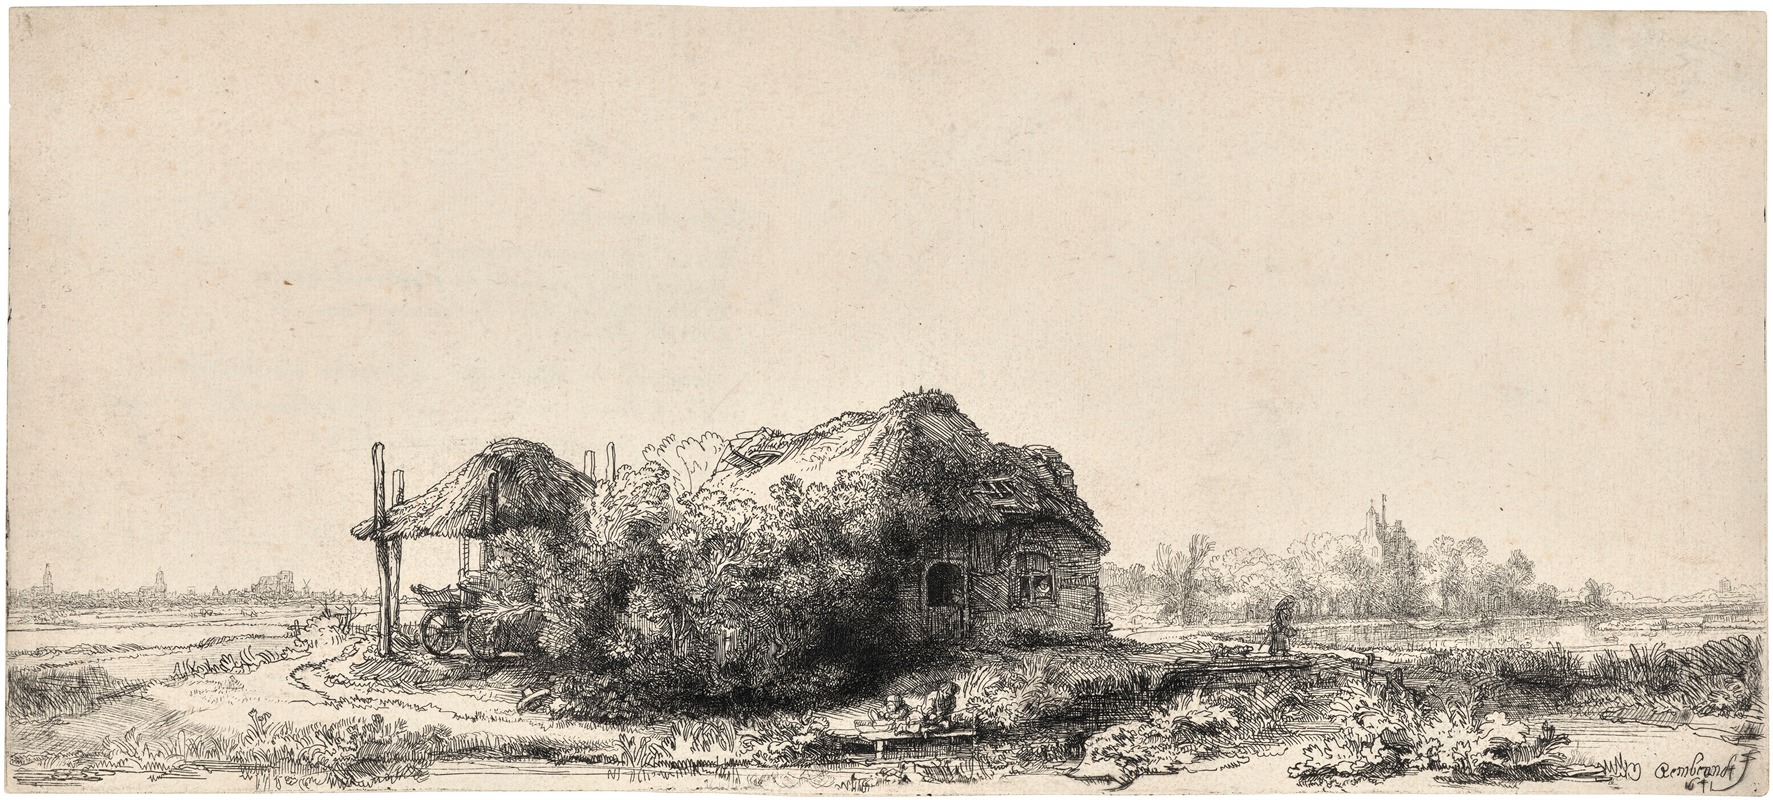 Rembrandt van Rijn - Landscape with Cottages and a Hay Barn